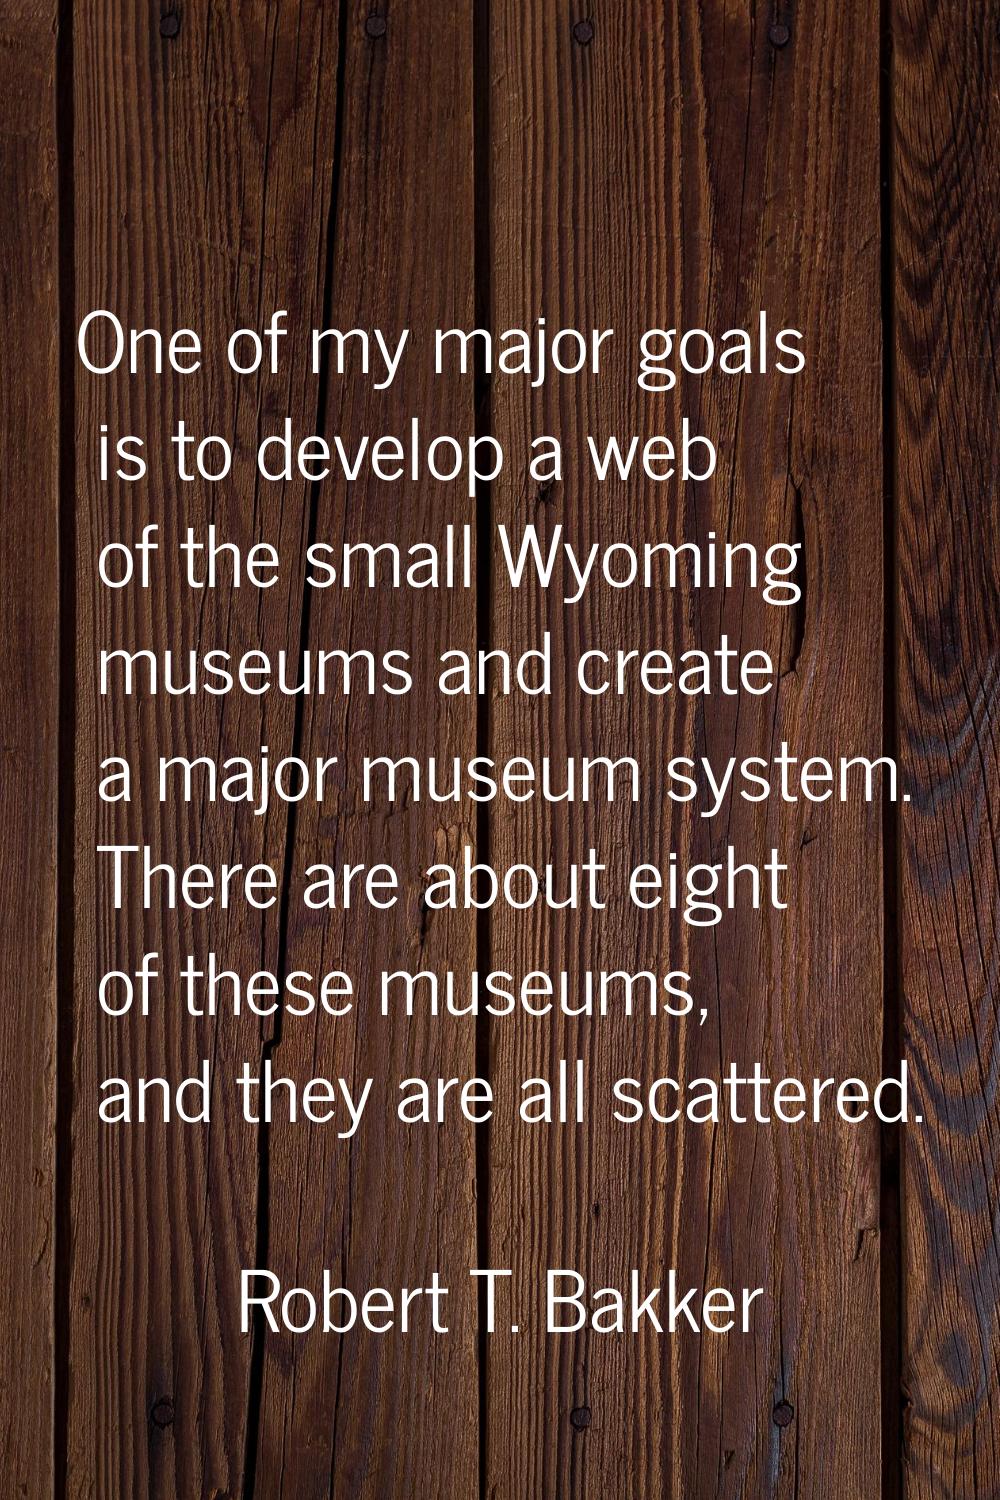 One of my major goals is to develop a web of the small Wyoming museums and create a major museum sy